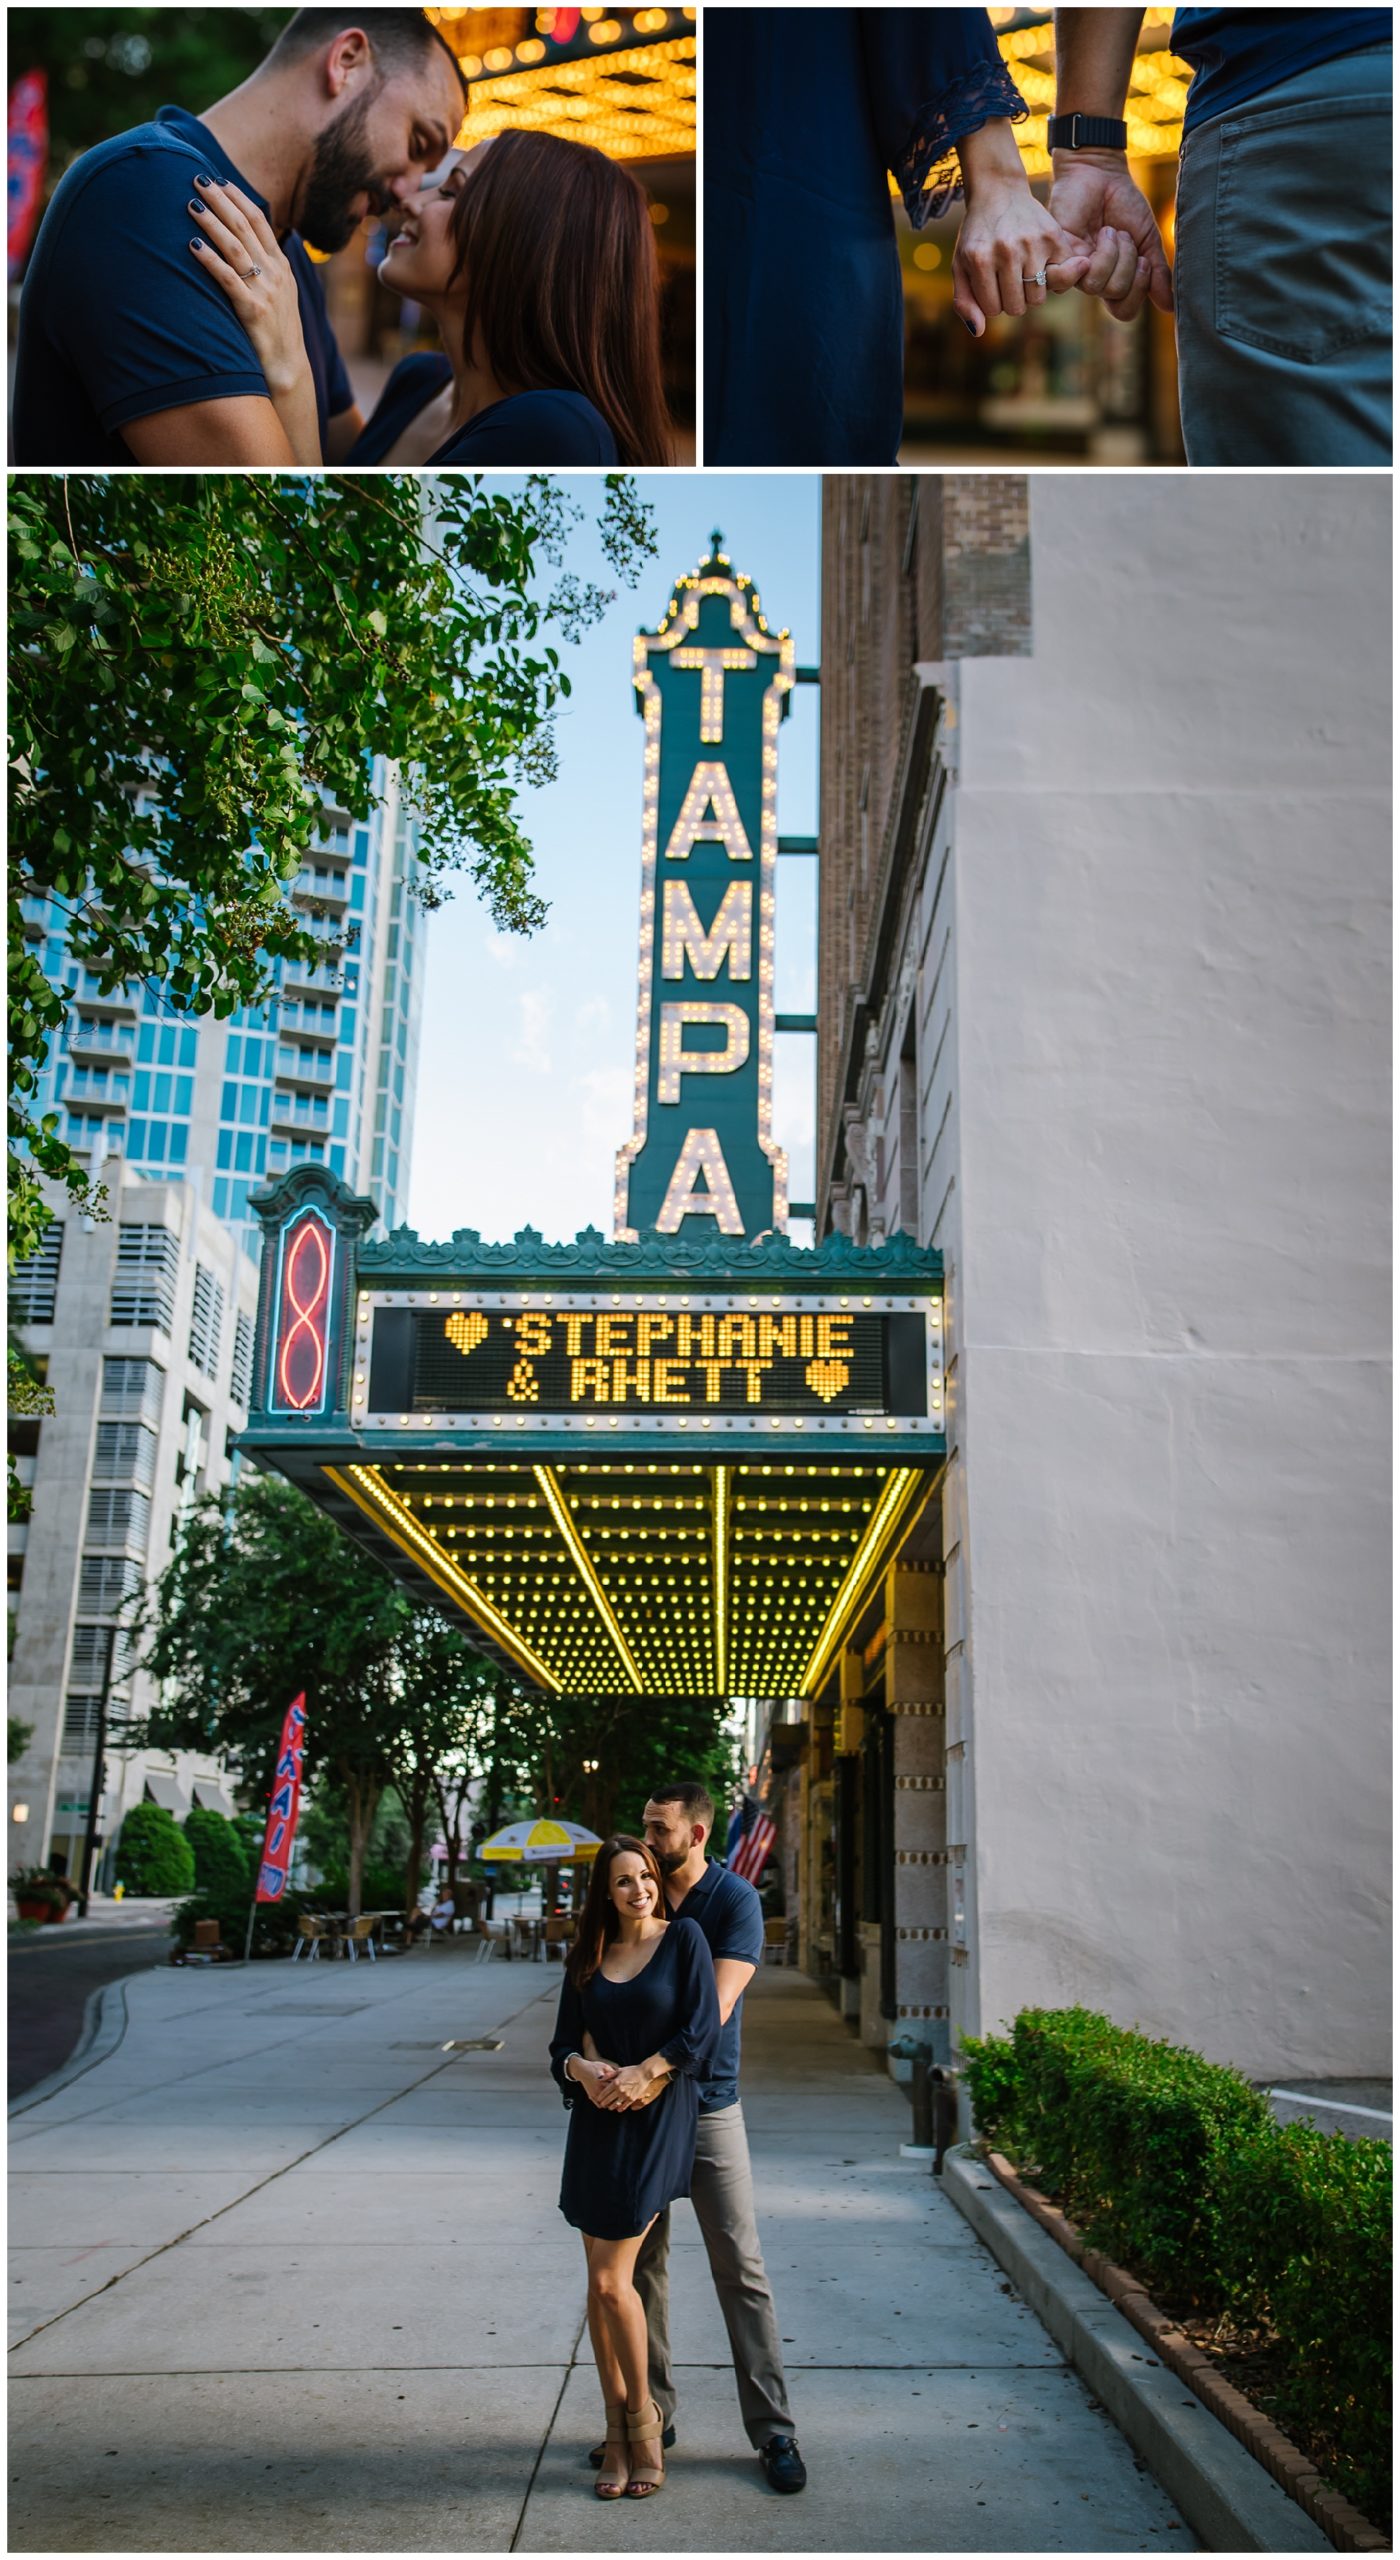 tampa-theater-romantic-surprise-proposal-red-roses-photographer_0017.jpg